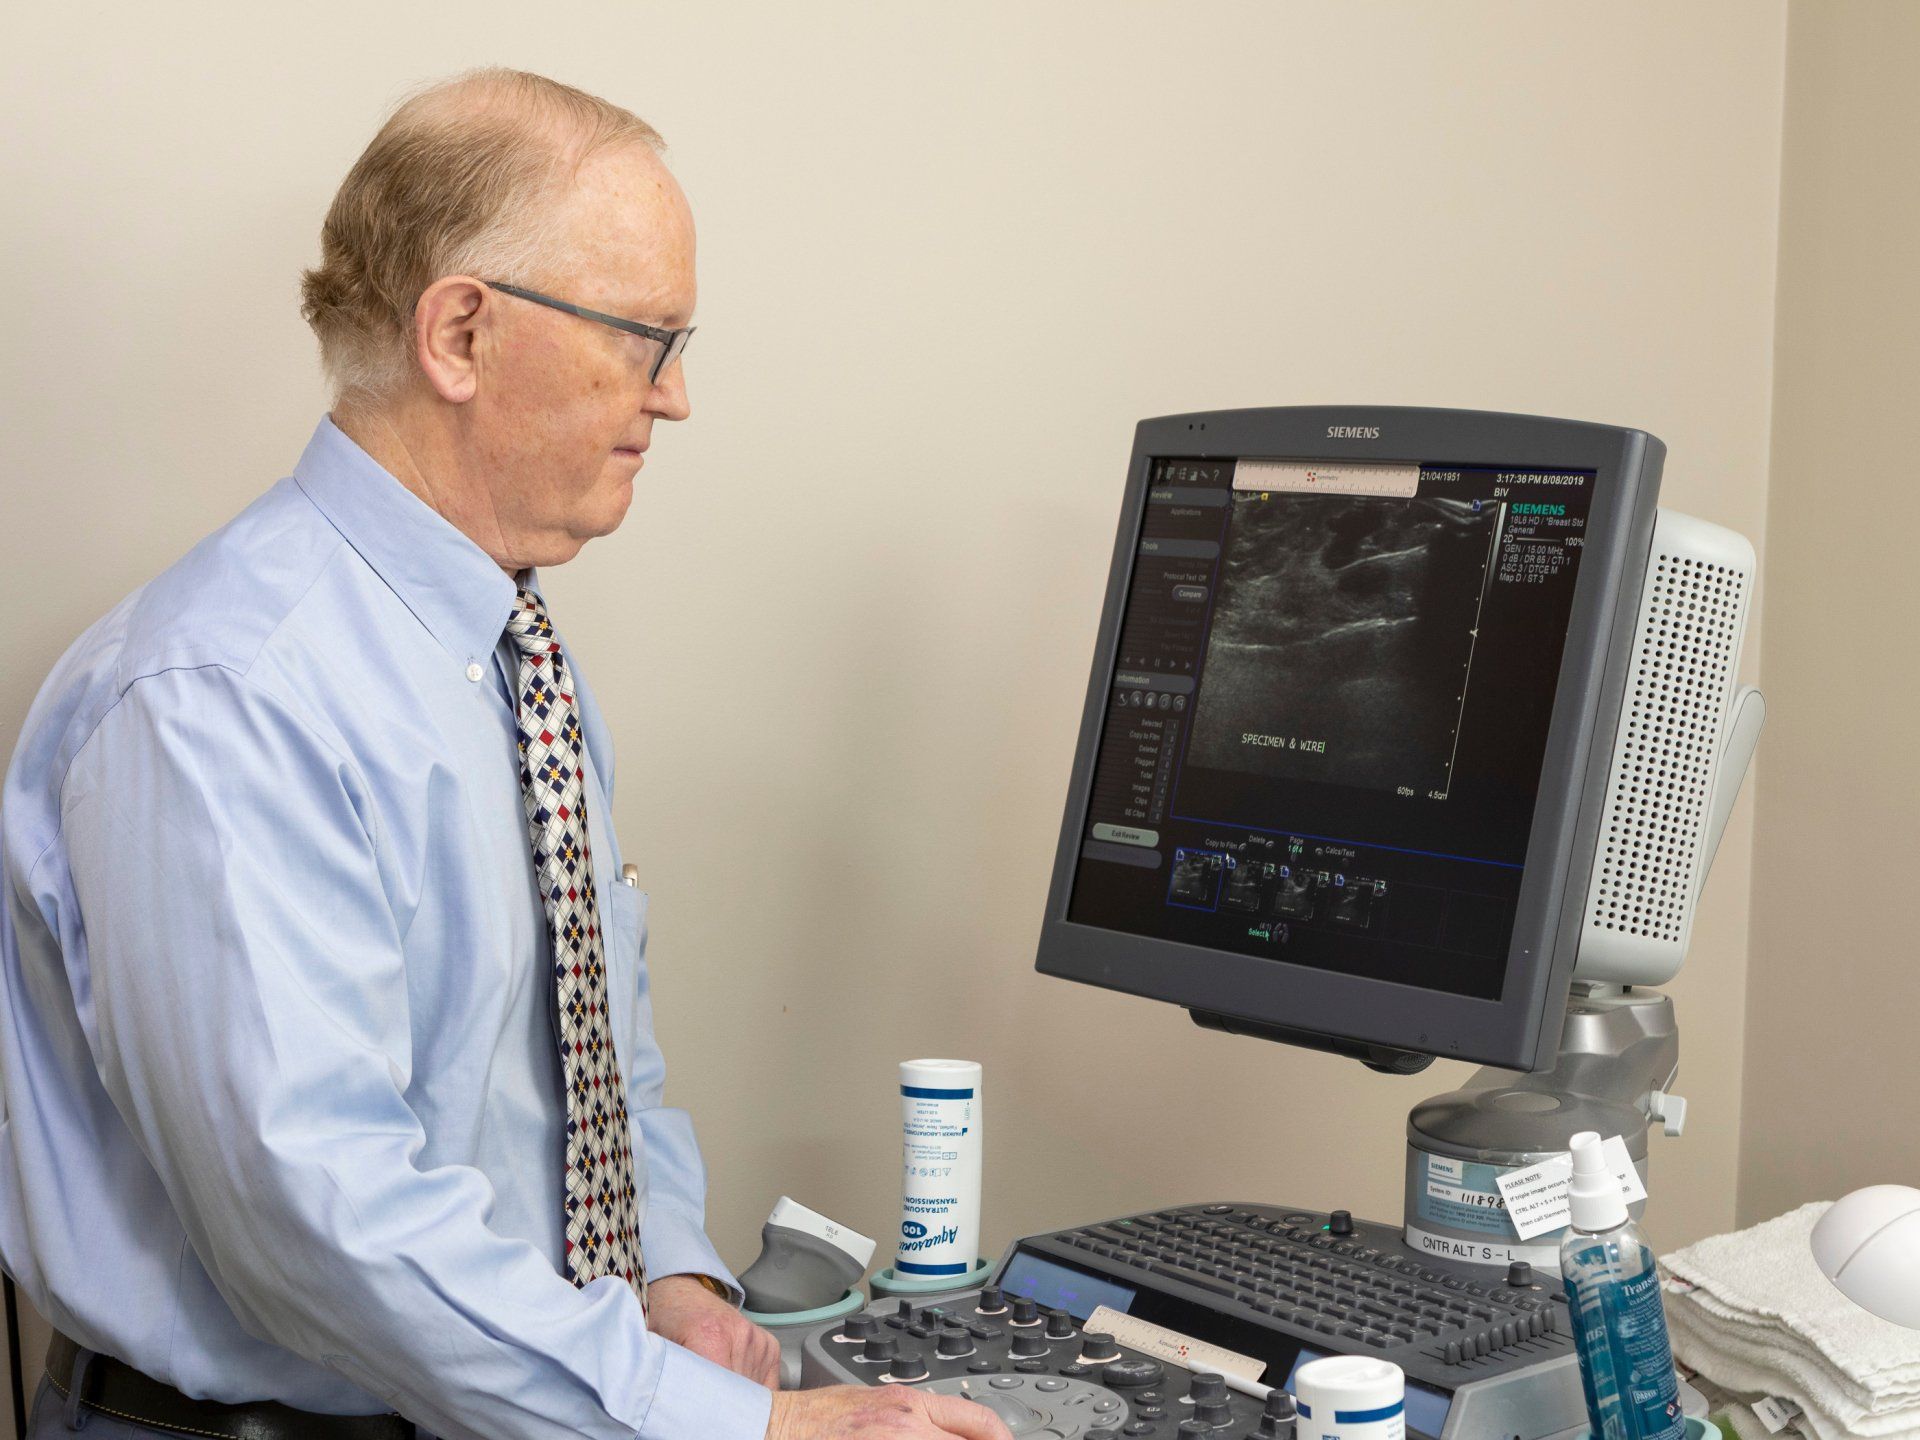 A doctor looking at the breast ultrasound